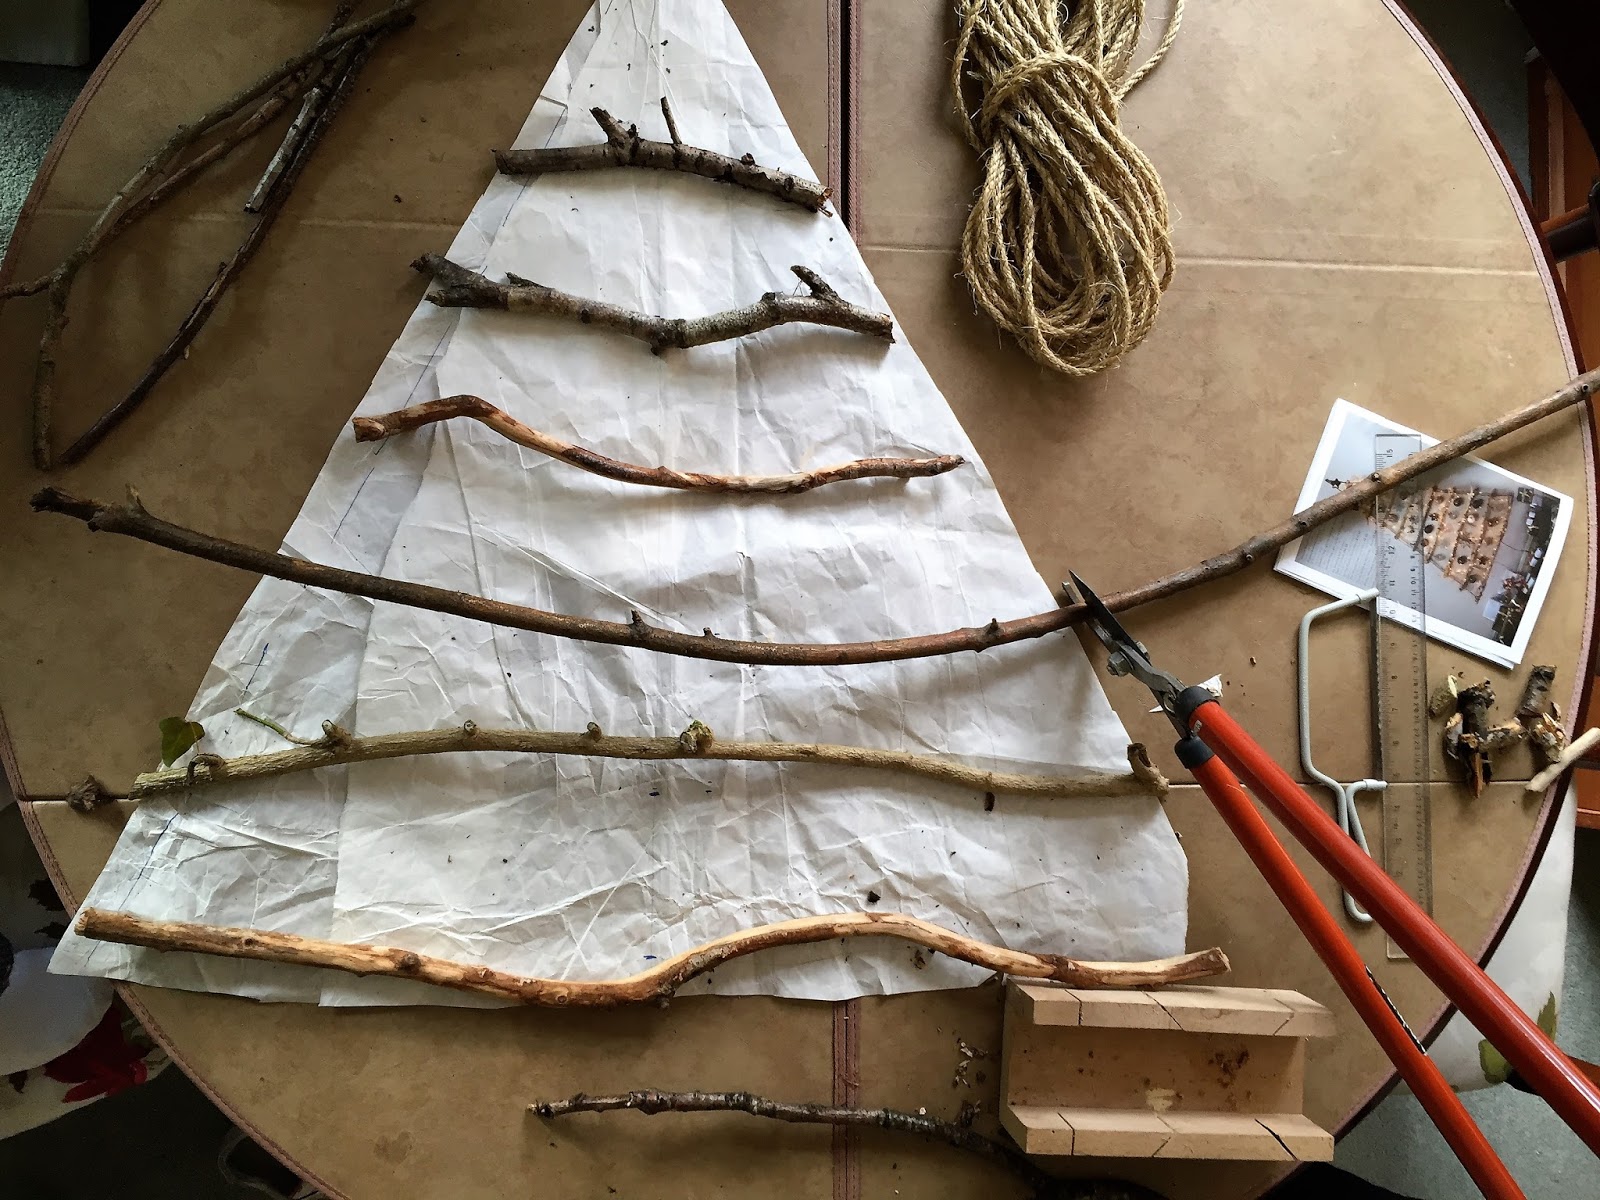 Getting crafty for Christmas - Create a Christmas Tree Wall Hanging, photo by modernbricabrac